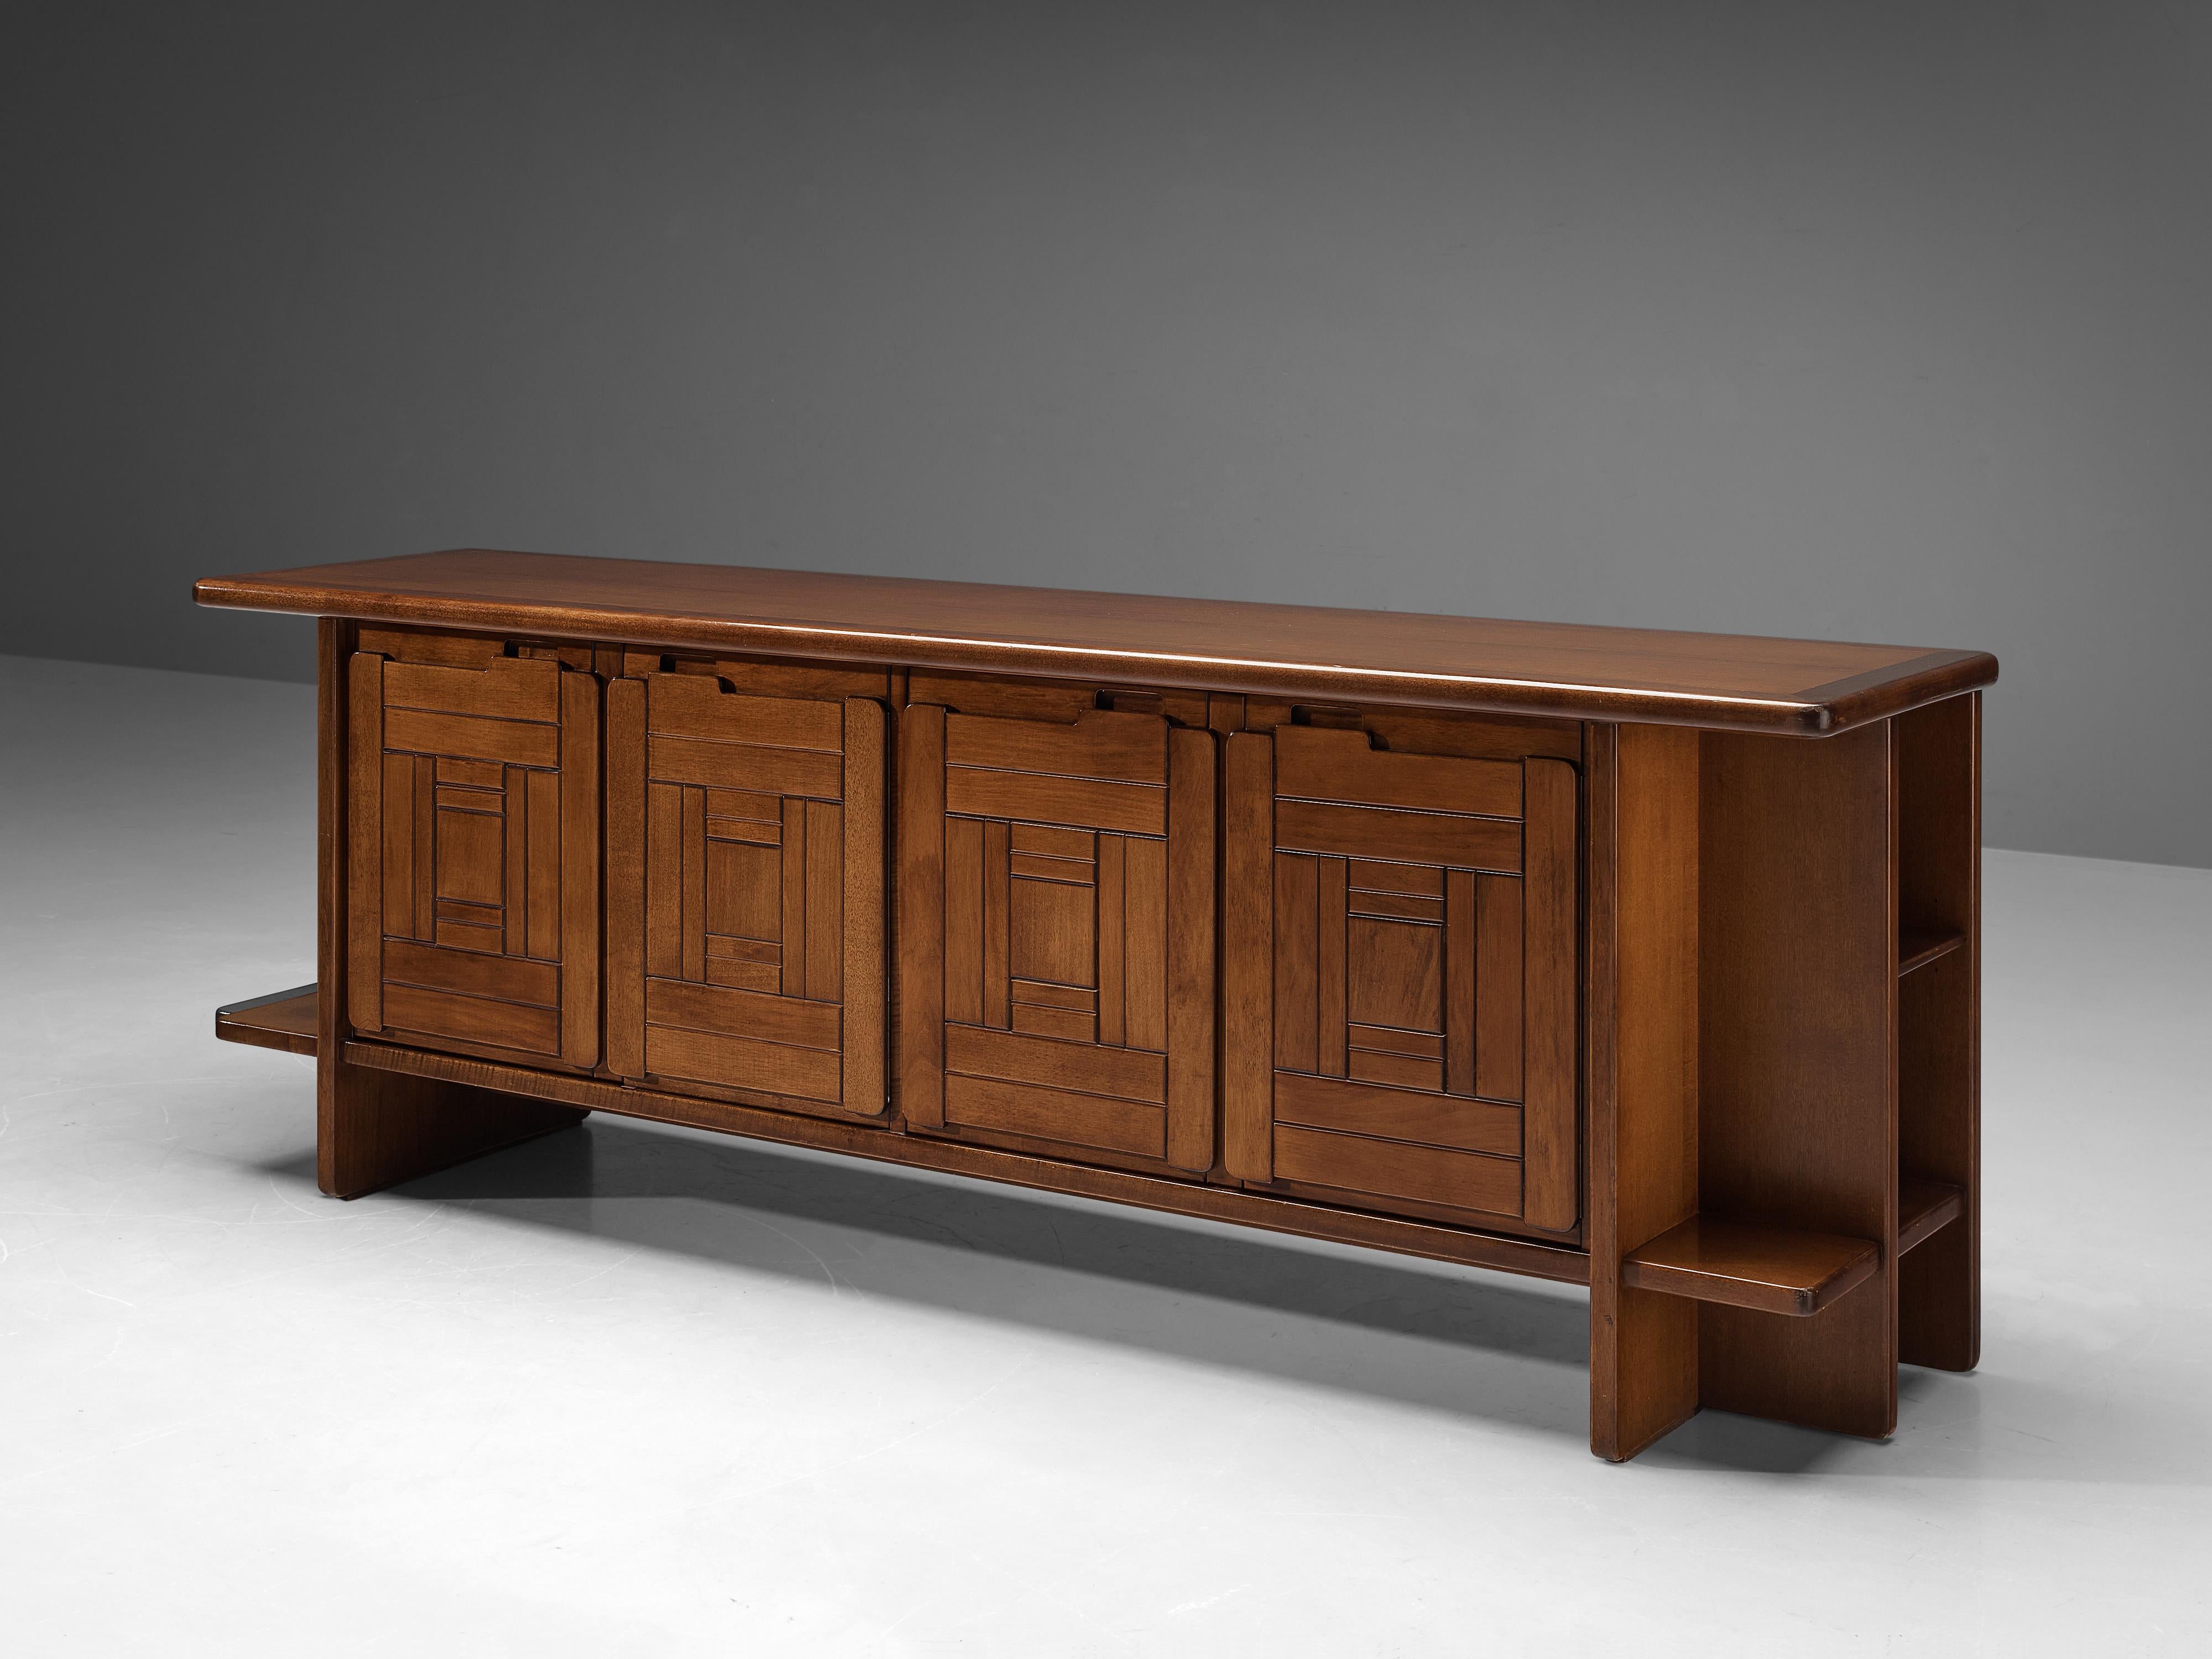 Sideboard, walnut, Italy, 1970s

This sideboard is a good example of excellent woodworking by virtue of the graphical designed doors adding a wonderful rhythmic and haptic surface to the front. The design of the frame which is executed in